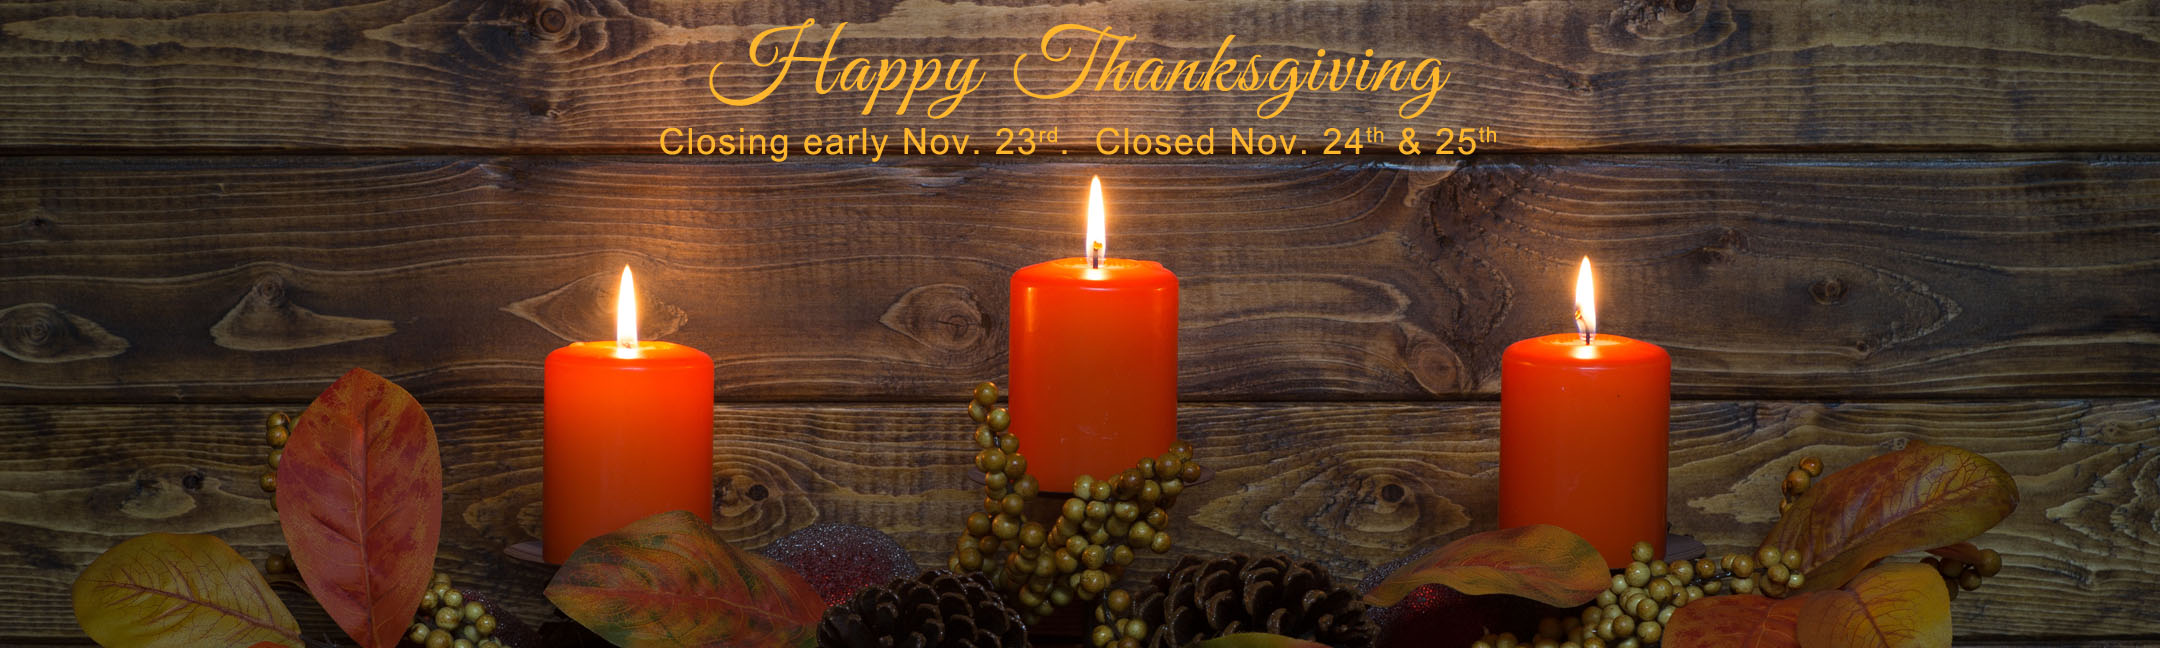 Happy Thanksgiving - Closed 24th & 25th